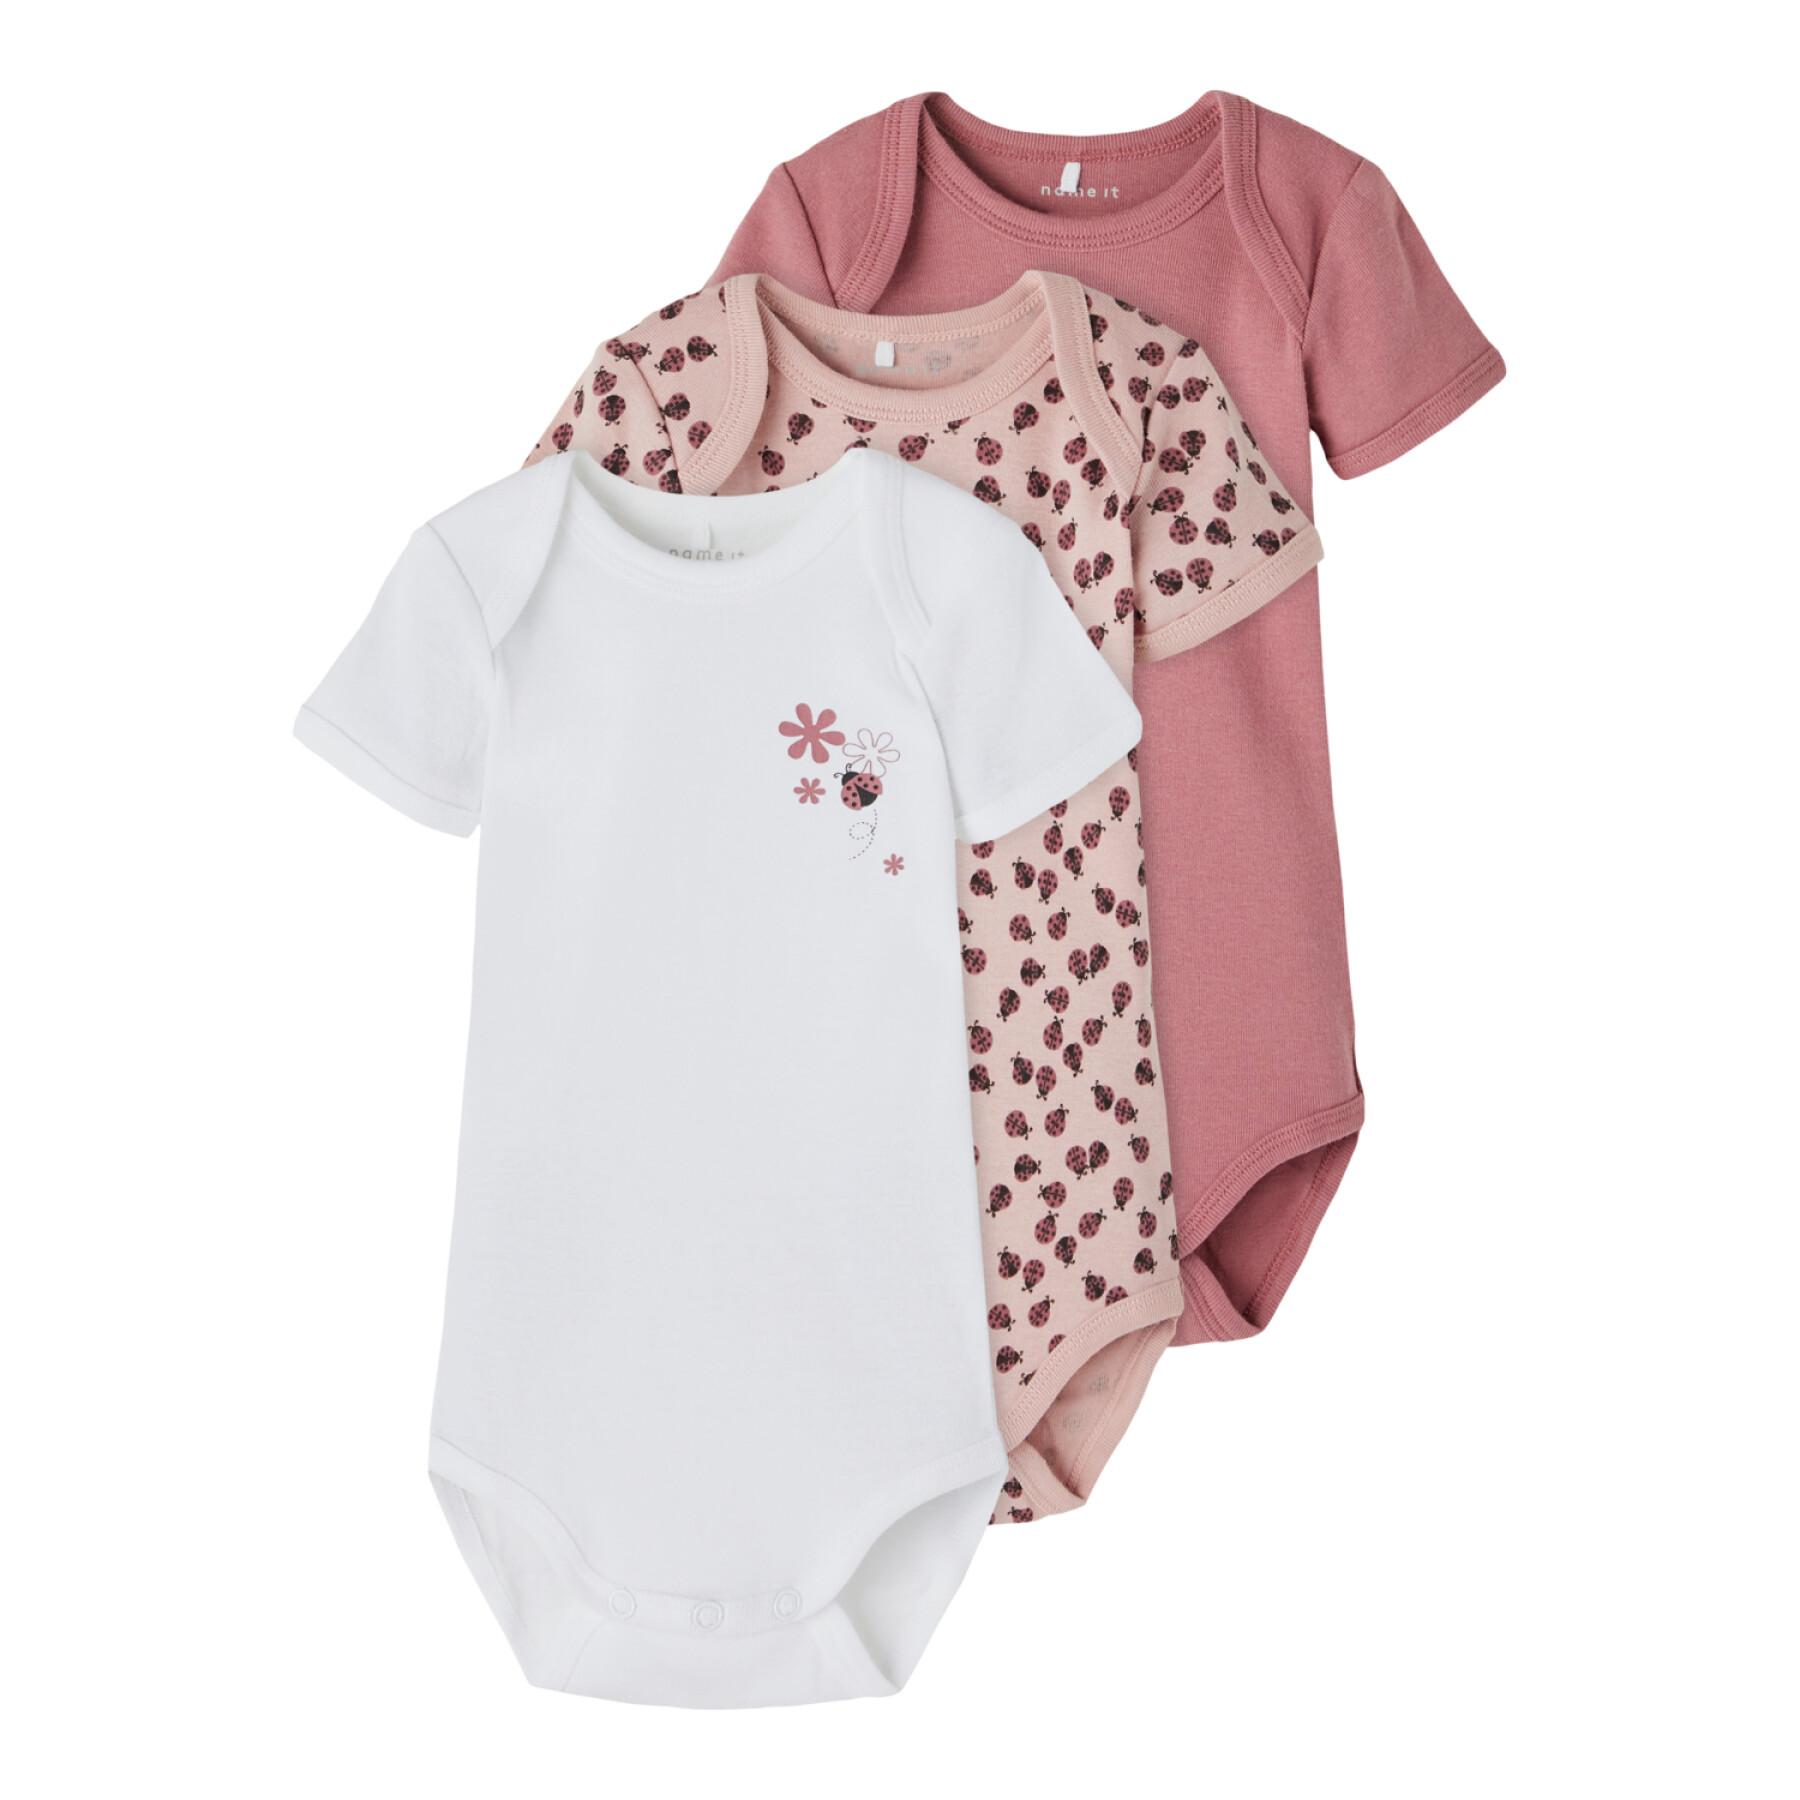 Pack of 3 baby bodysuits Name it Deco